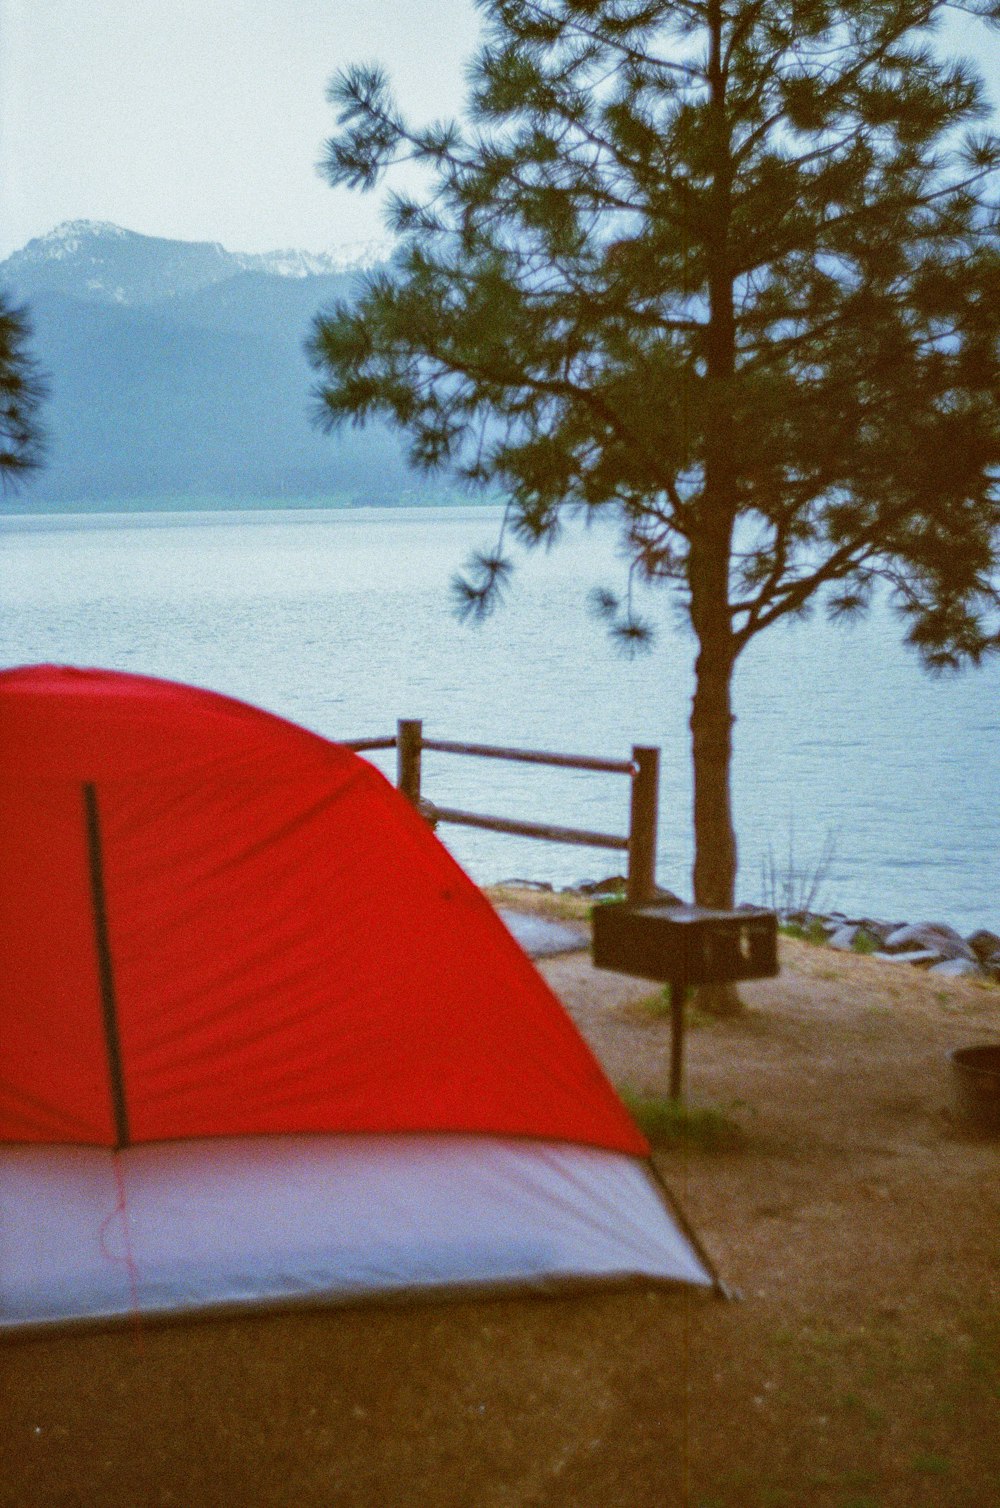 red tent near body of water during daytime